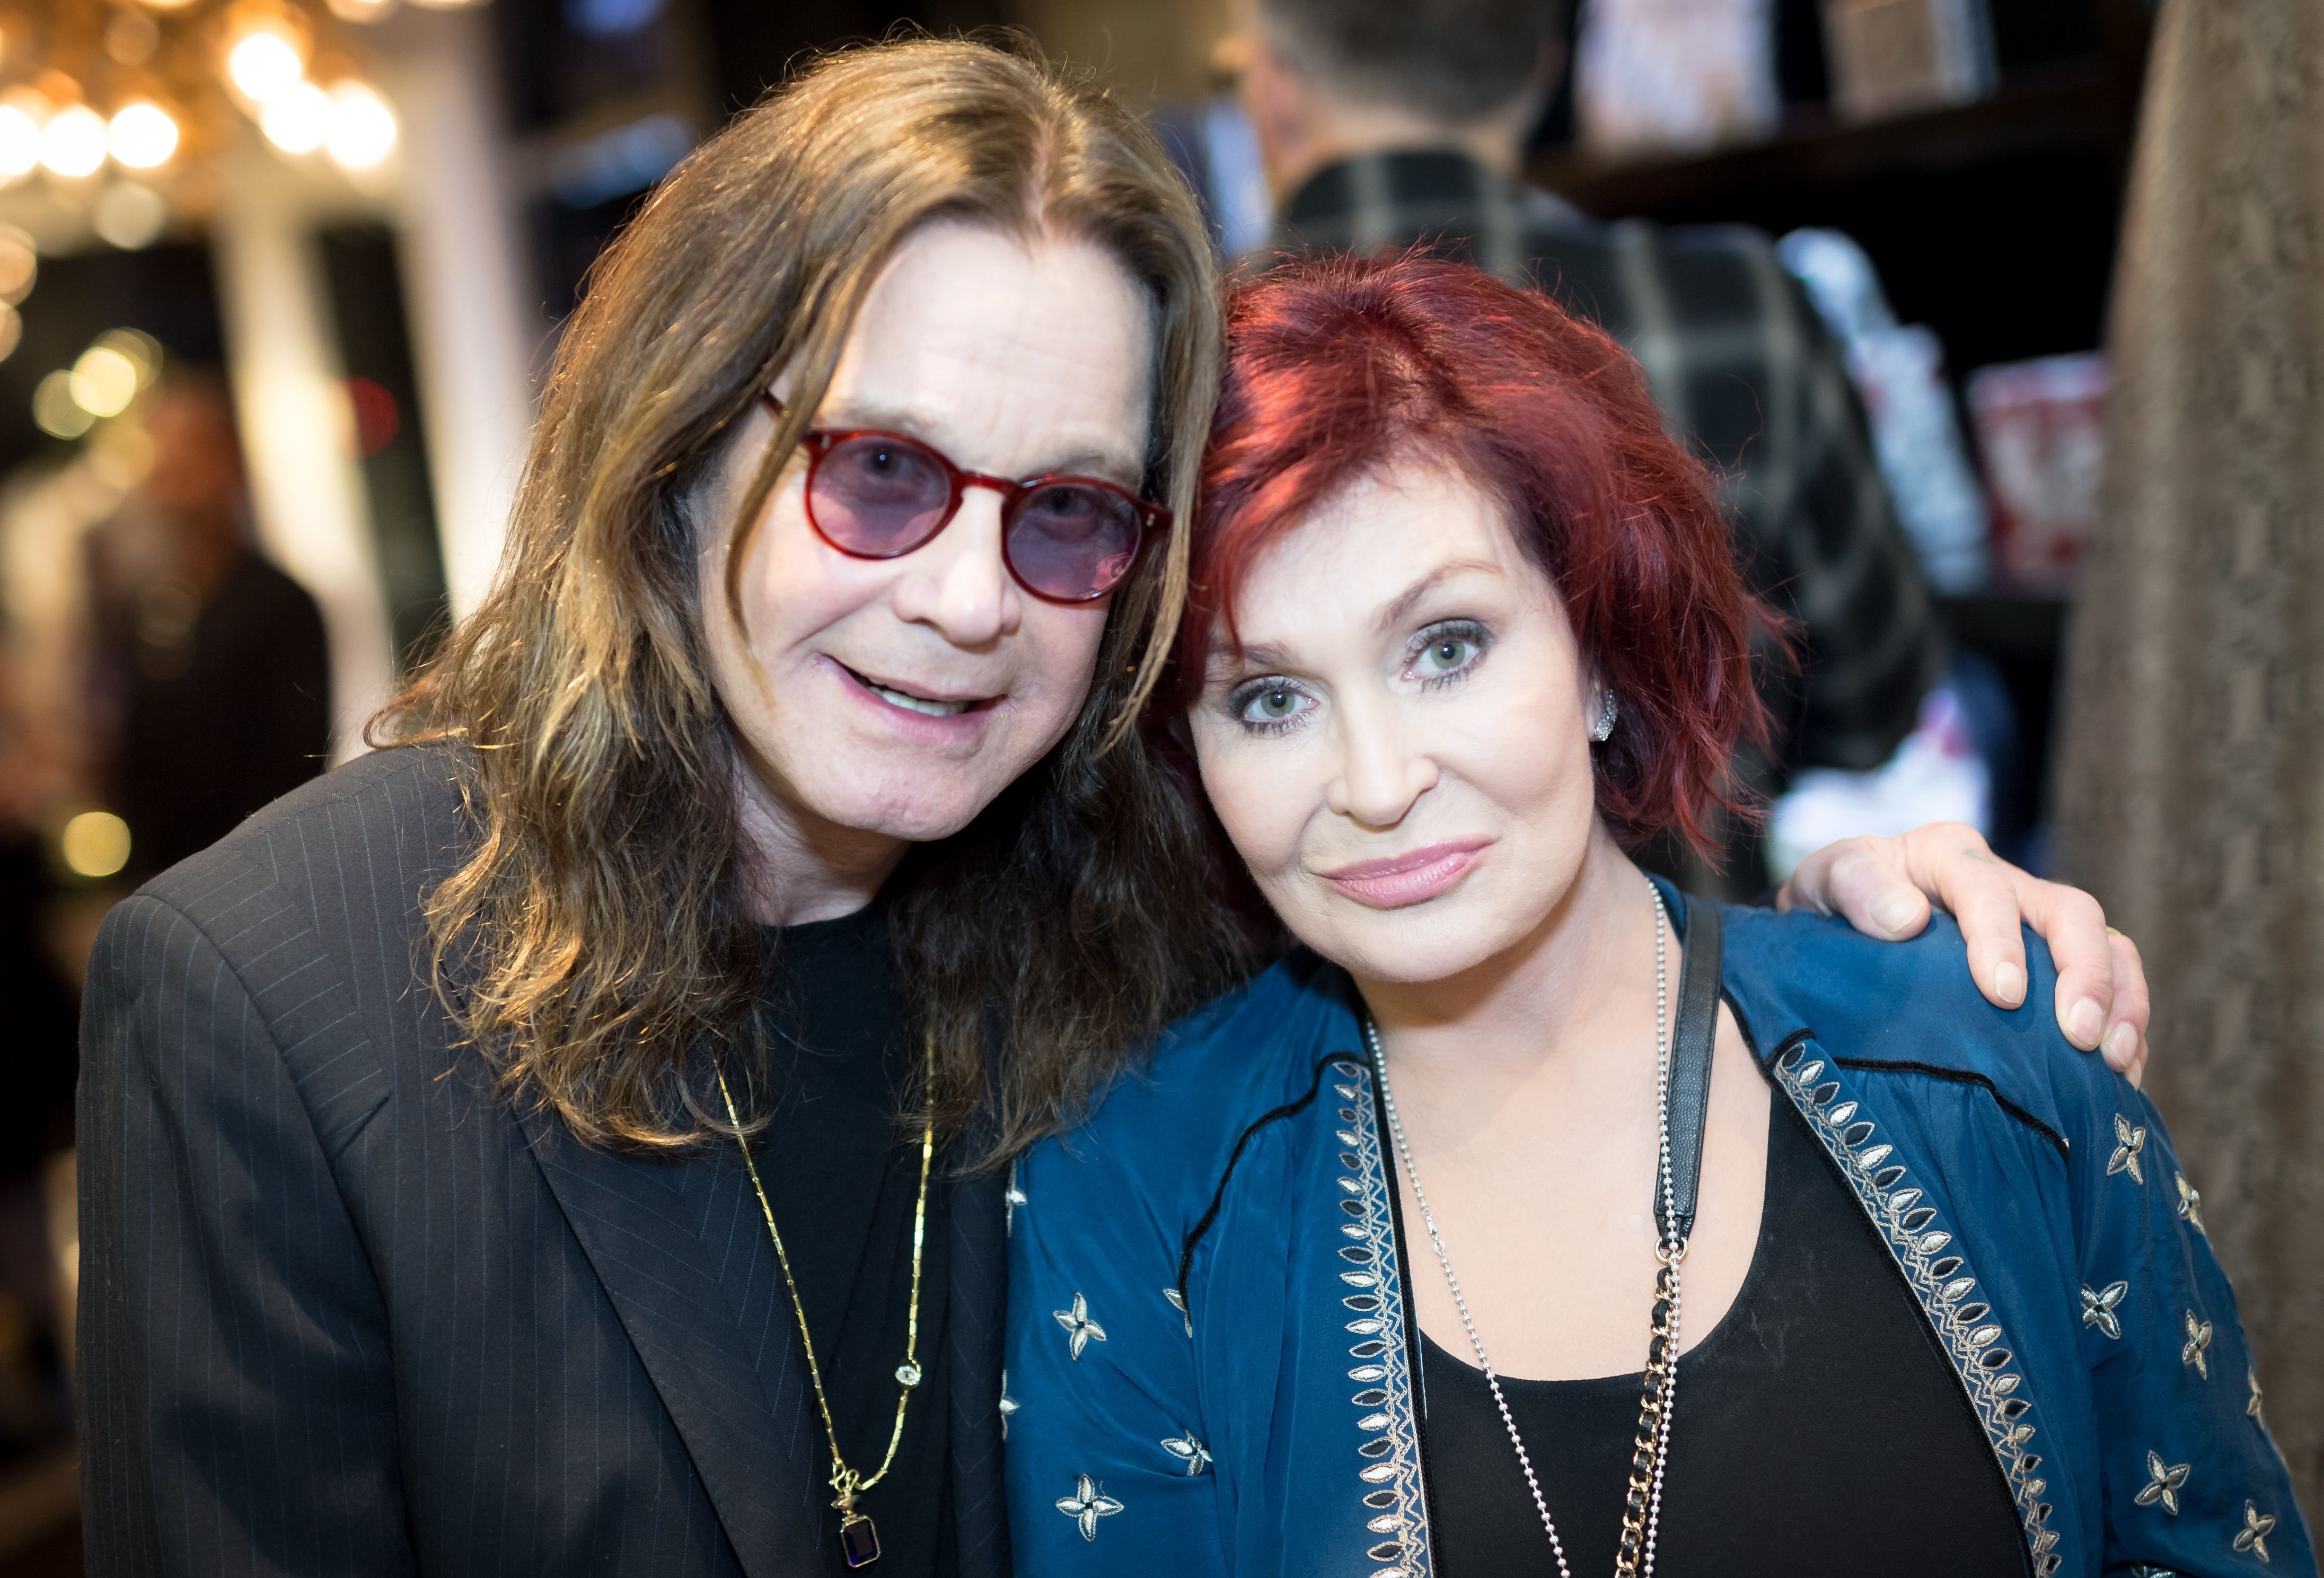 Ozzy Osbourne and Sharon Osbourne at the Billy Morrison - Aude Somnia Solo Exhibition at Elisabeth Weinstock on September 28, 2017 in Los Angeles, California. | Photo: Getty Images